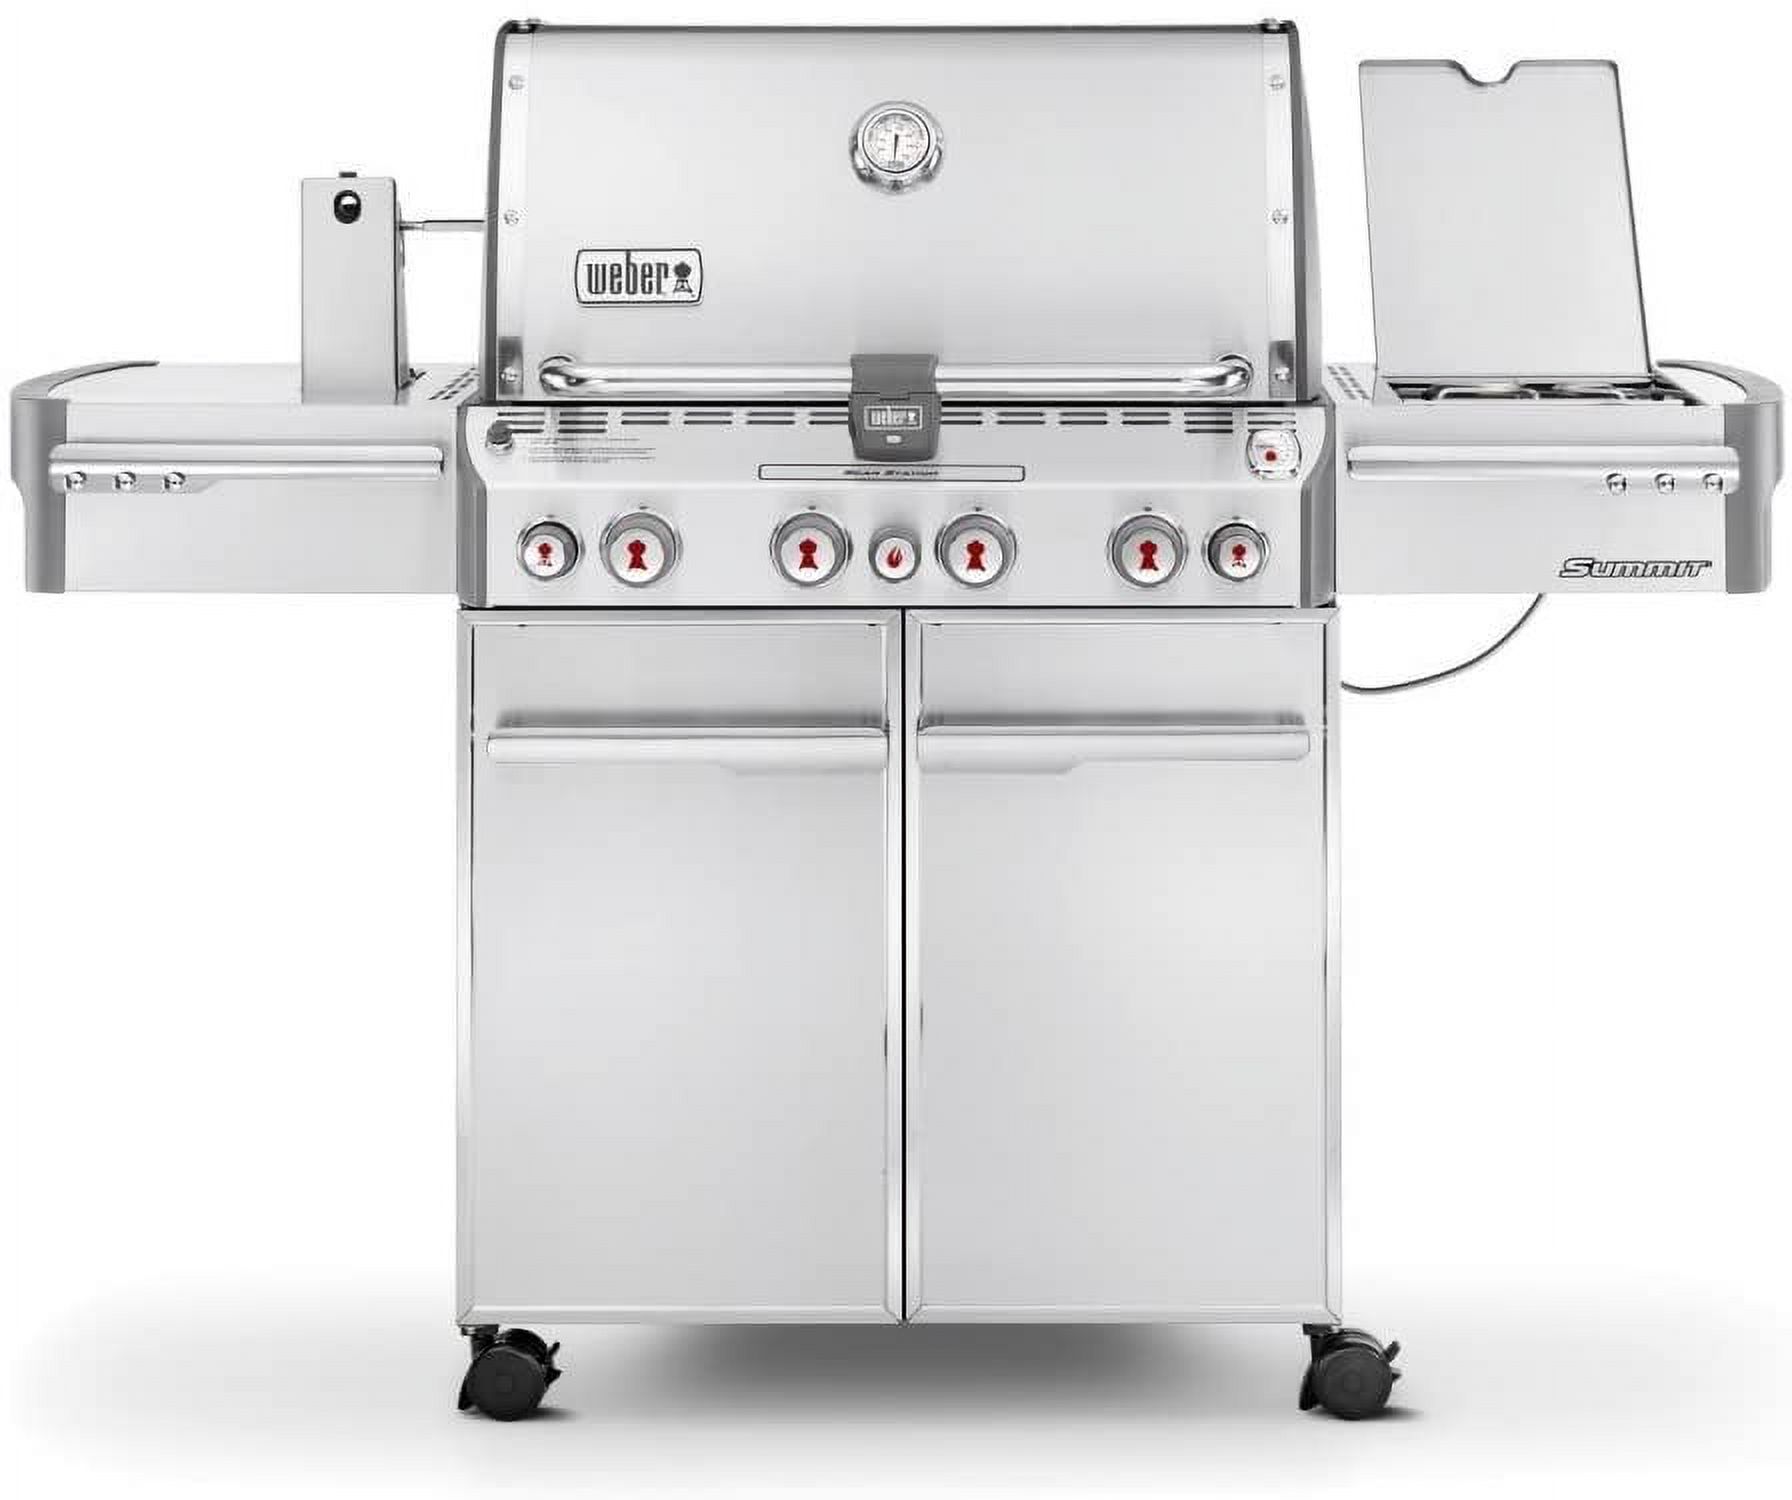 Weber 7170001 Summit S-470 4-Burner Liquid Propane Grill, Stainless Steel 580-Square Inch - image 1 of 2